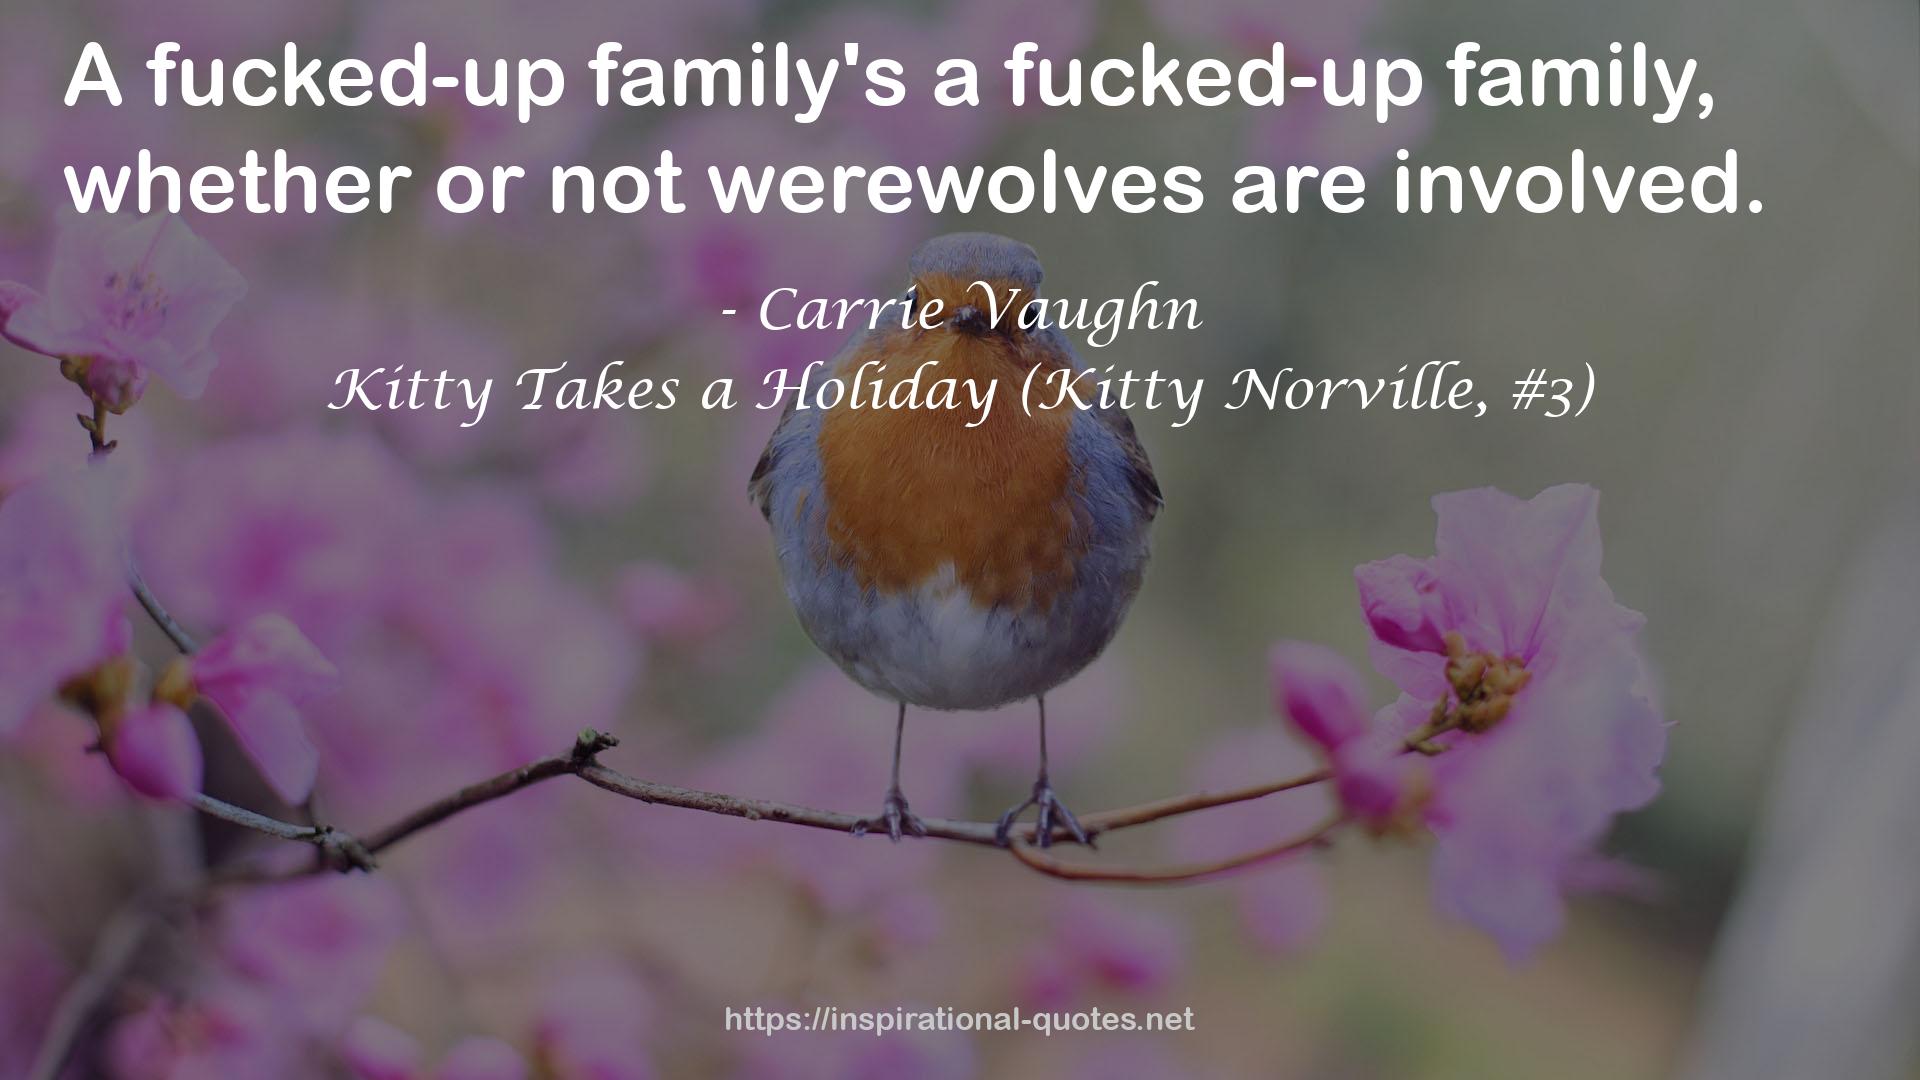 Kitty Takes a Holiday (Kitty Norville, #3) QUOTES